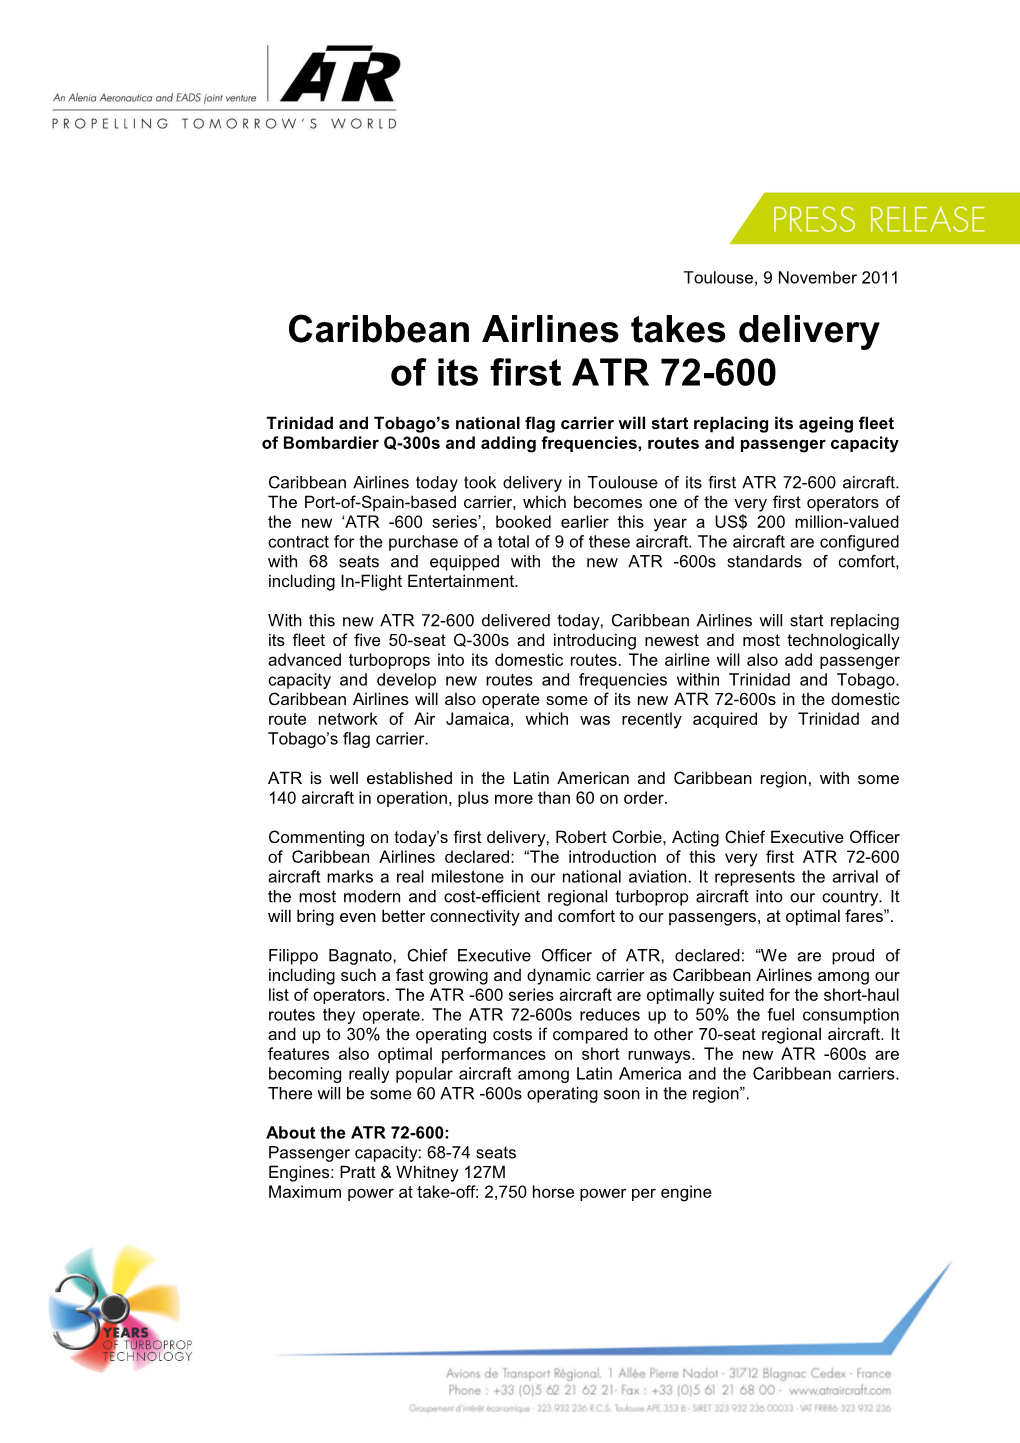 Caribbean Airlines Takes Delivery of Its First ATR 72-600